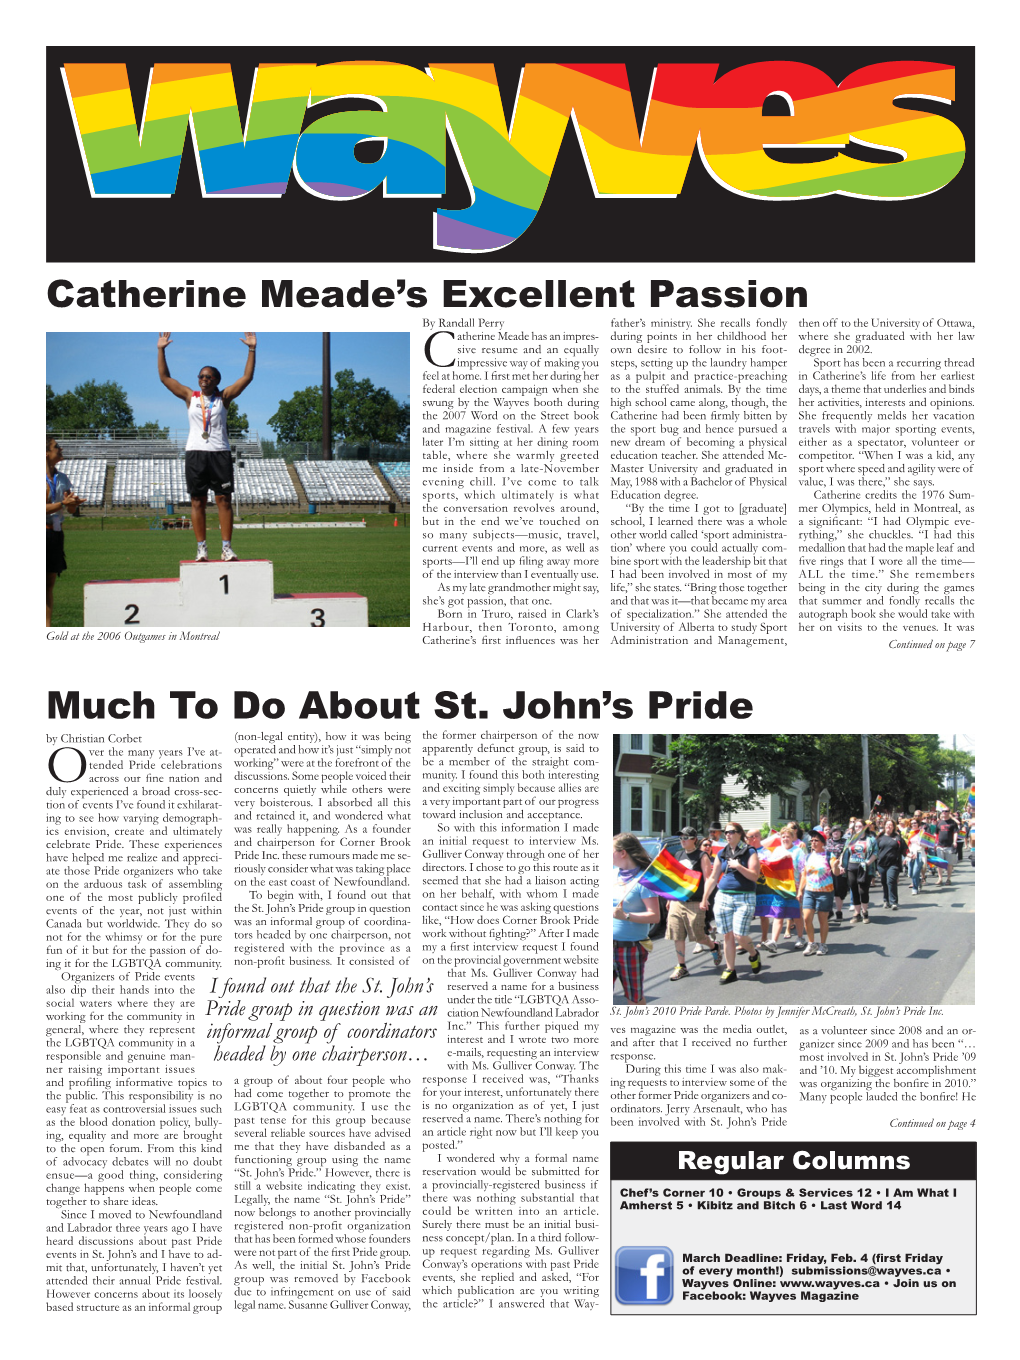 Much to Do About St. John's Pride Catherine Meade's Excellent Passion